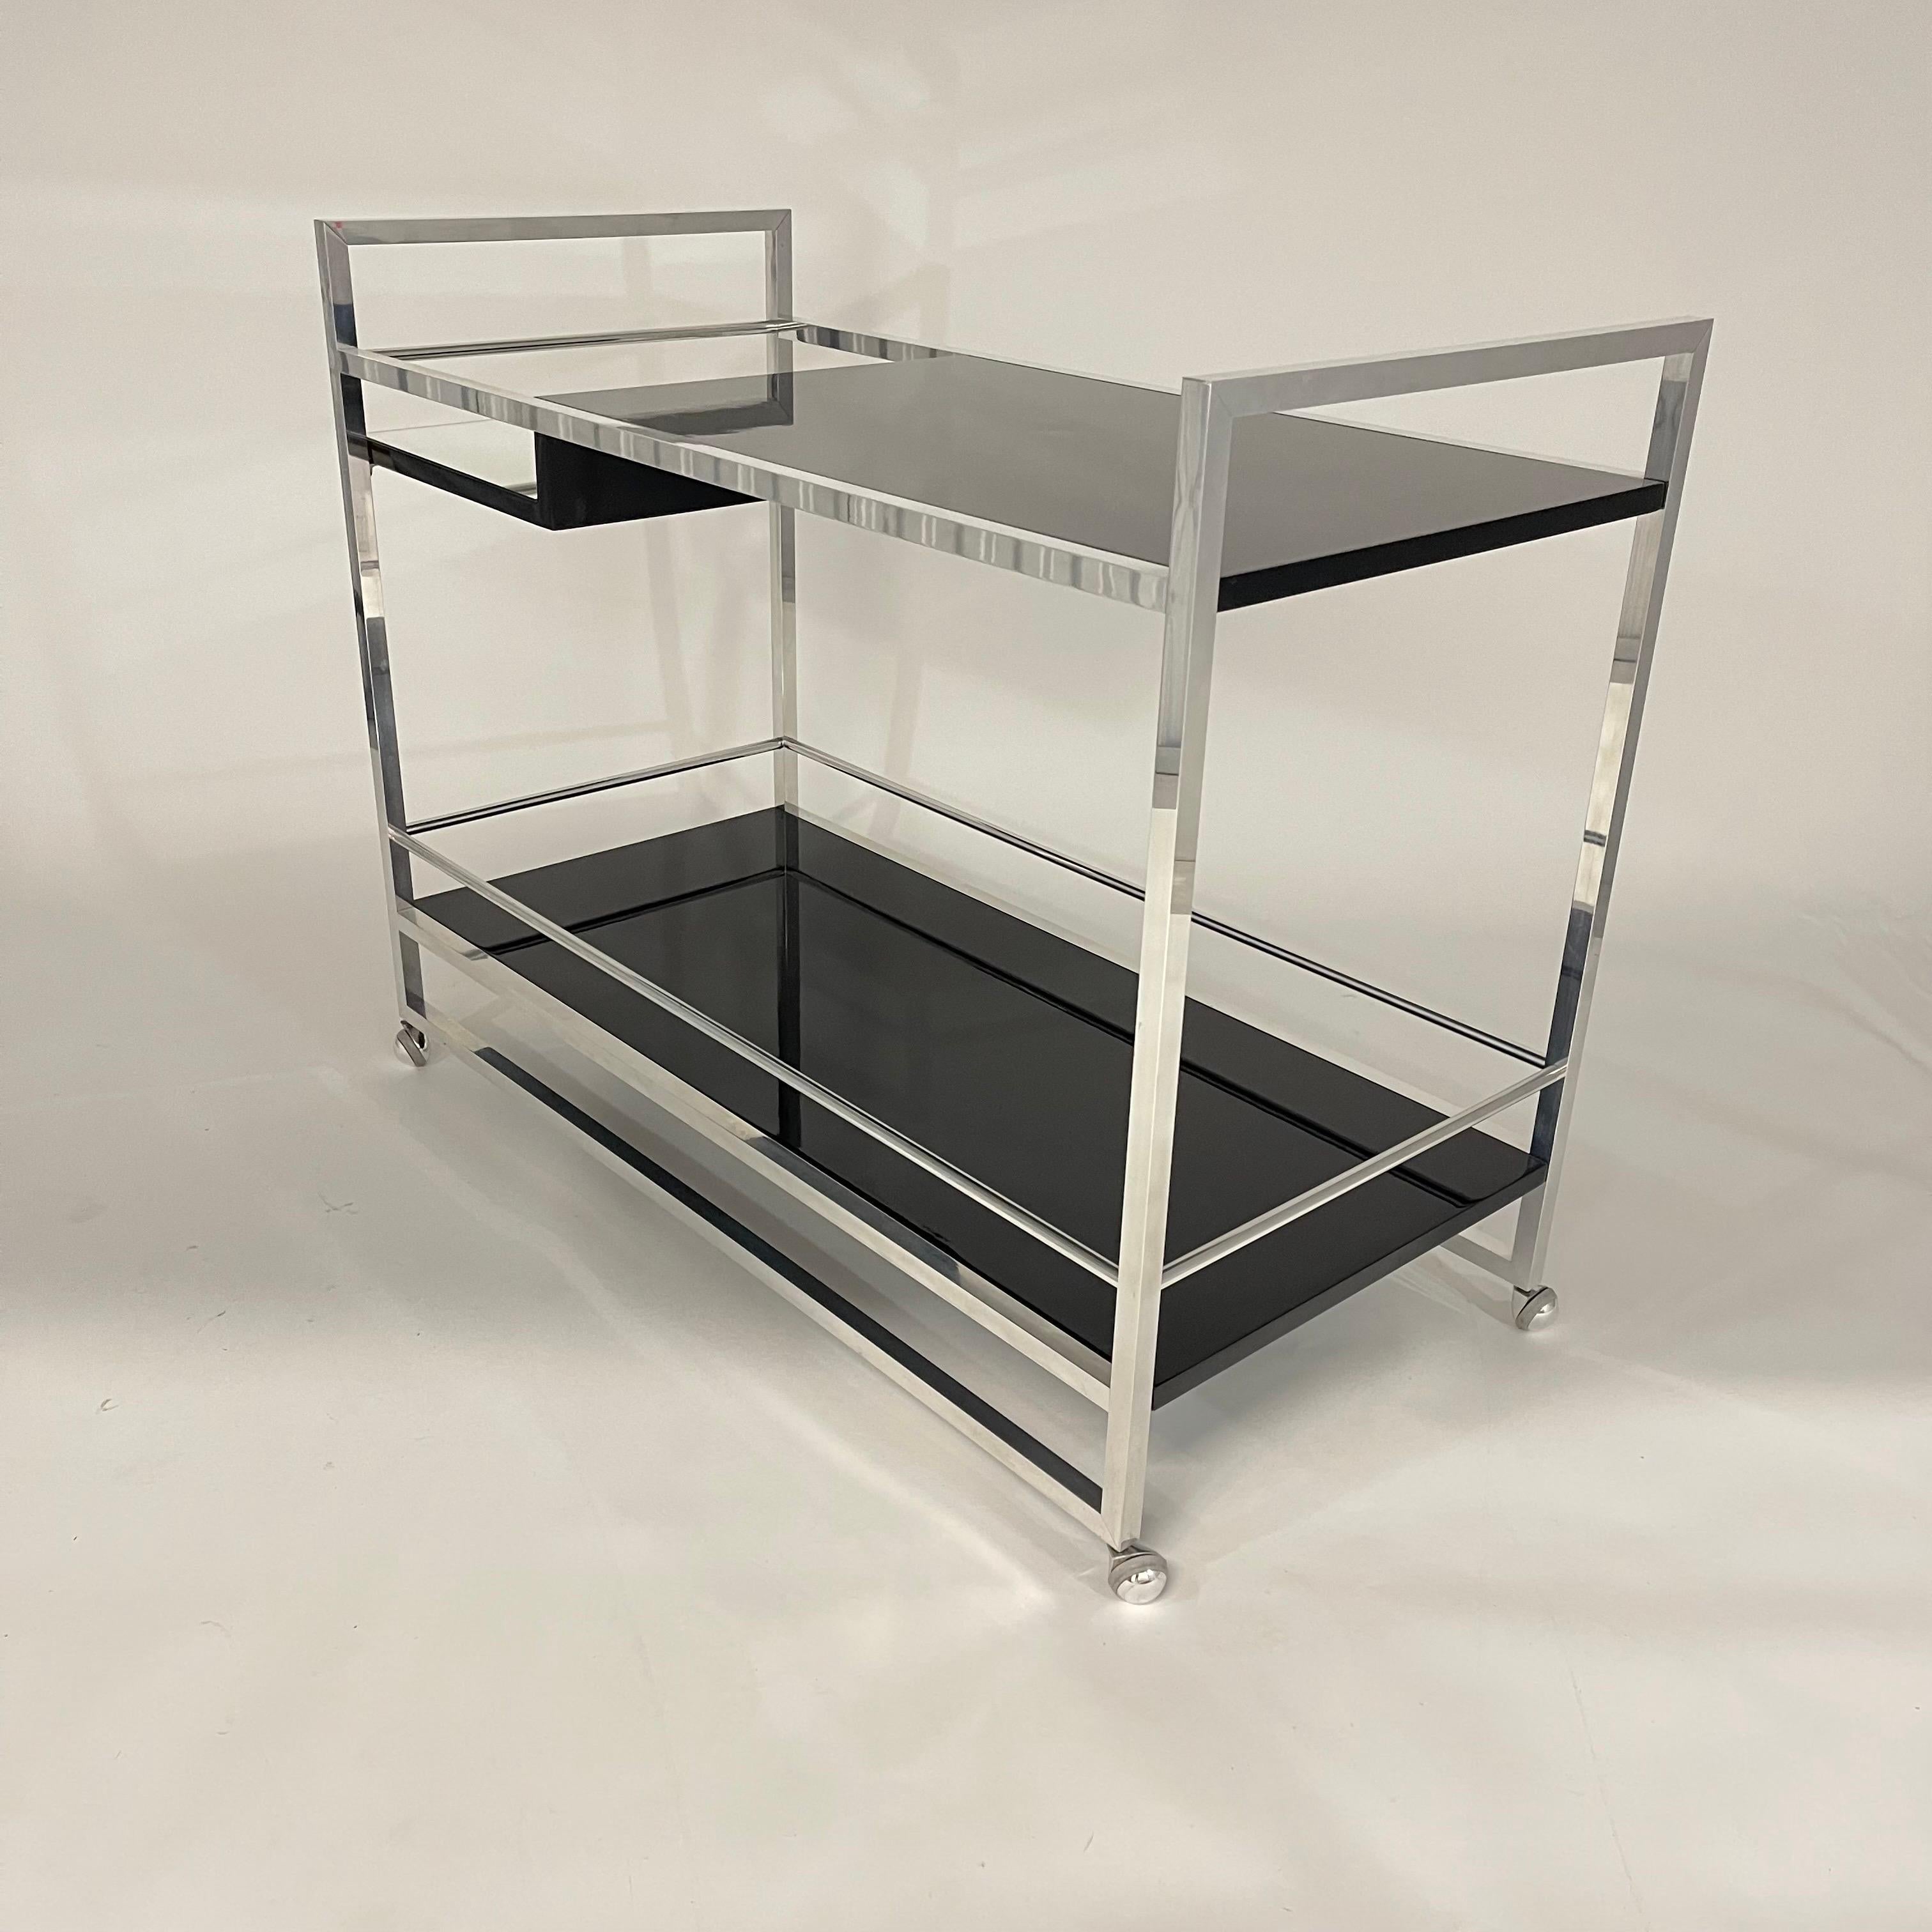 Mid-Century Bar Cart or Drinks Tea Trolley, rendered in a polished chrome frame with 3 levels of shelving, the bottom and top shelves in black lacquer with a middle bottle or ice bucket shelf in mirror, all supported in revolving castors. Italy,